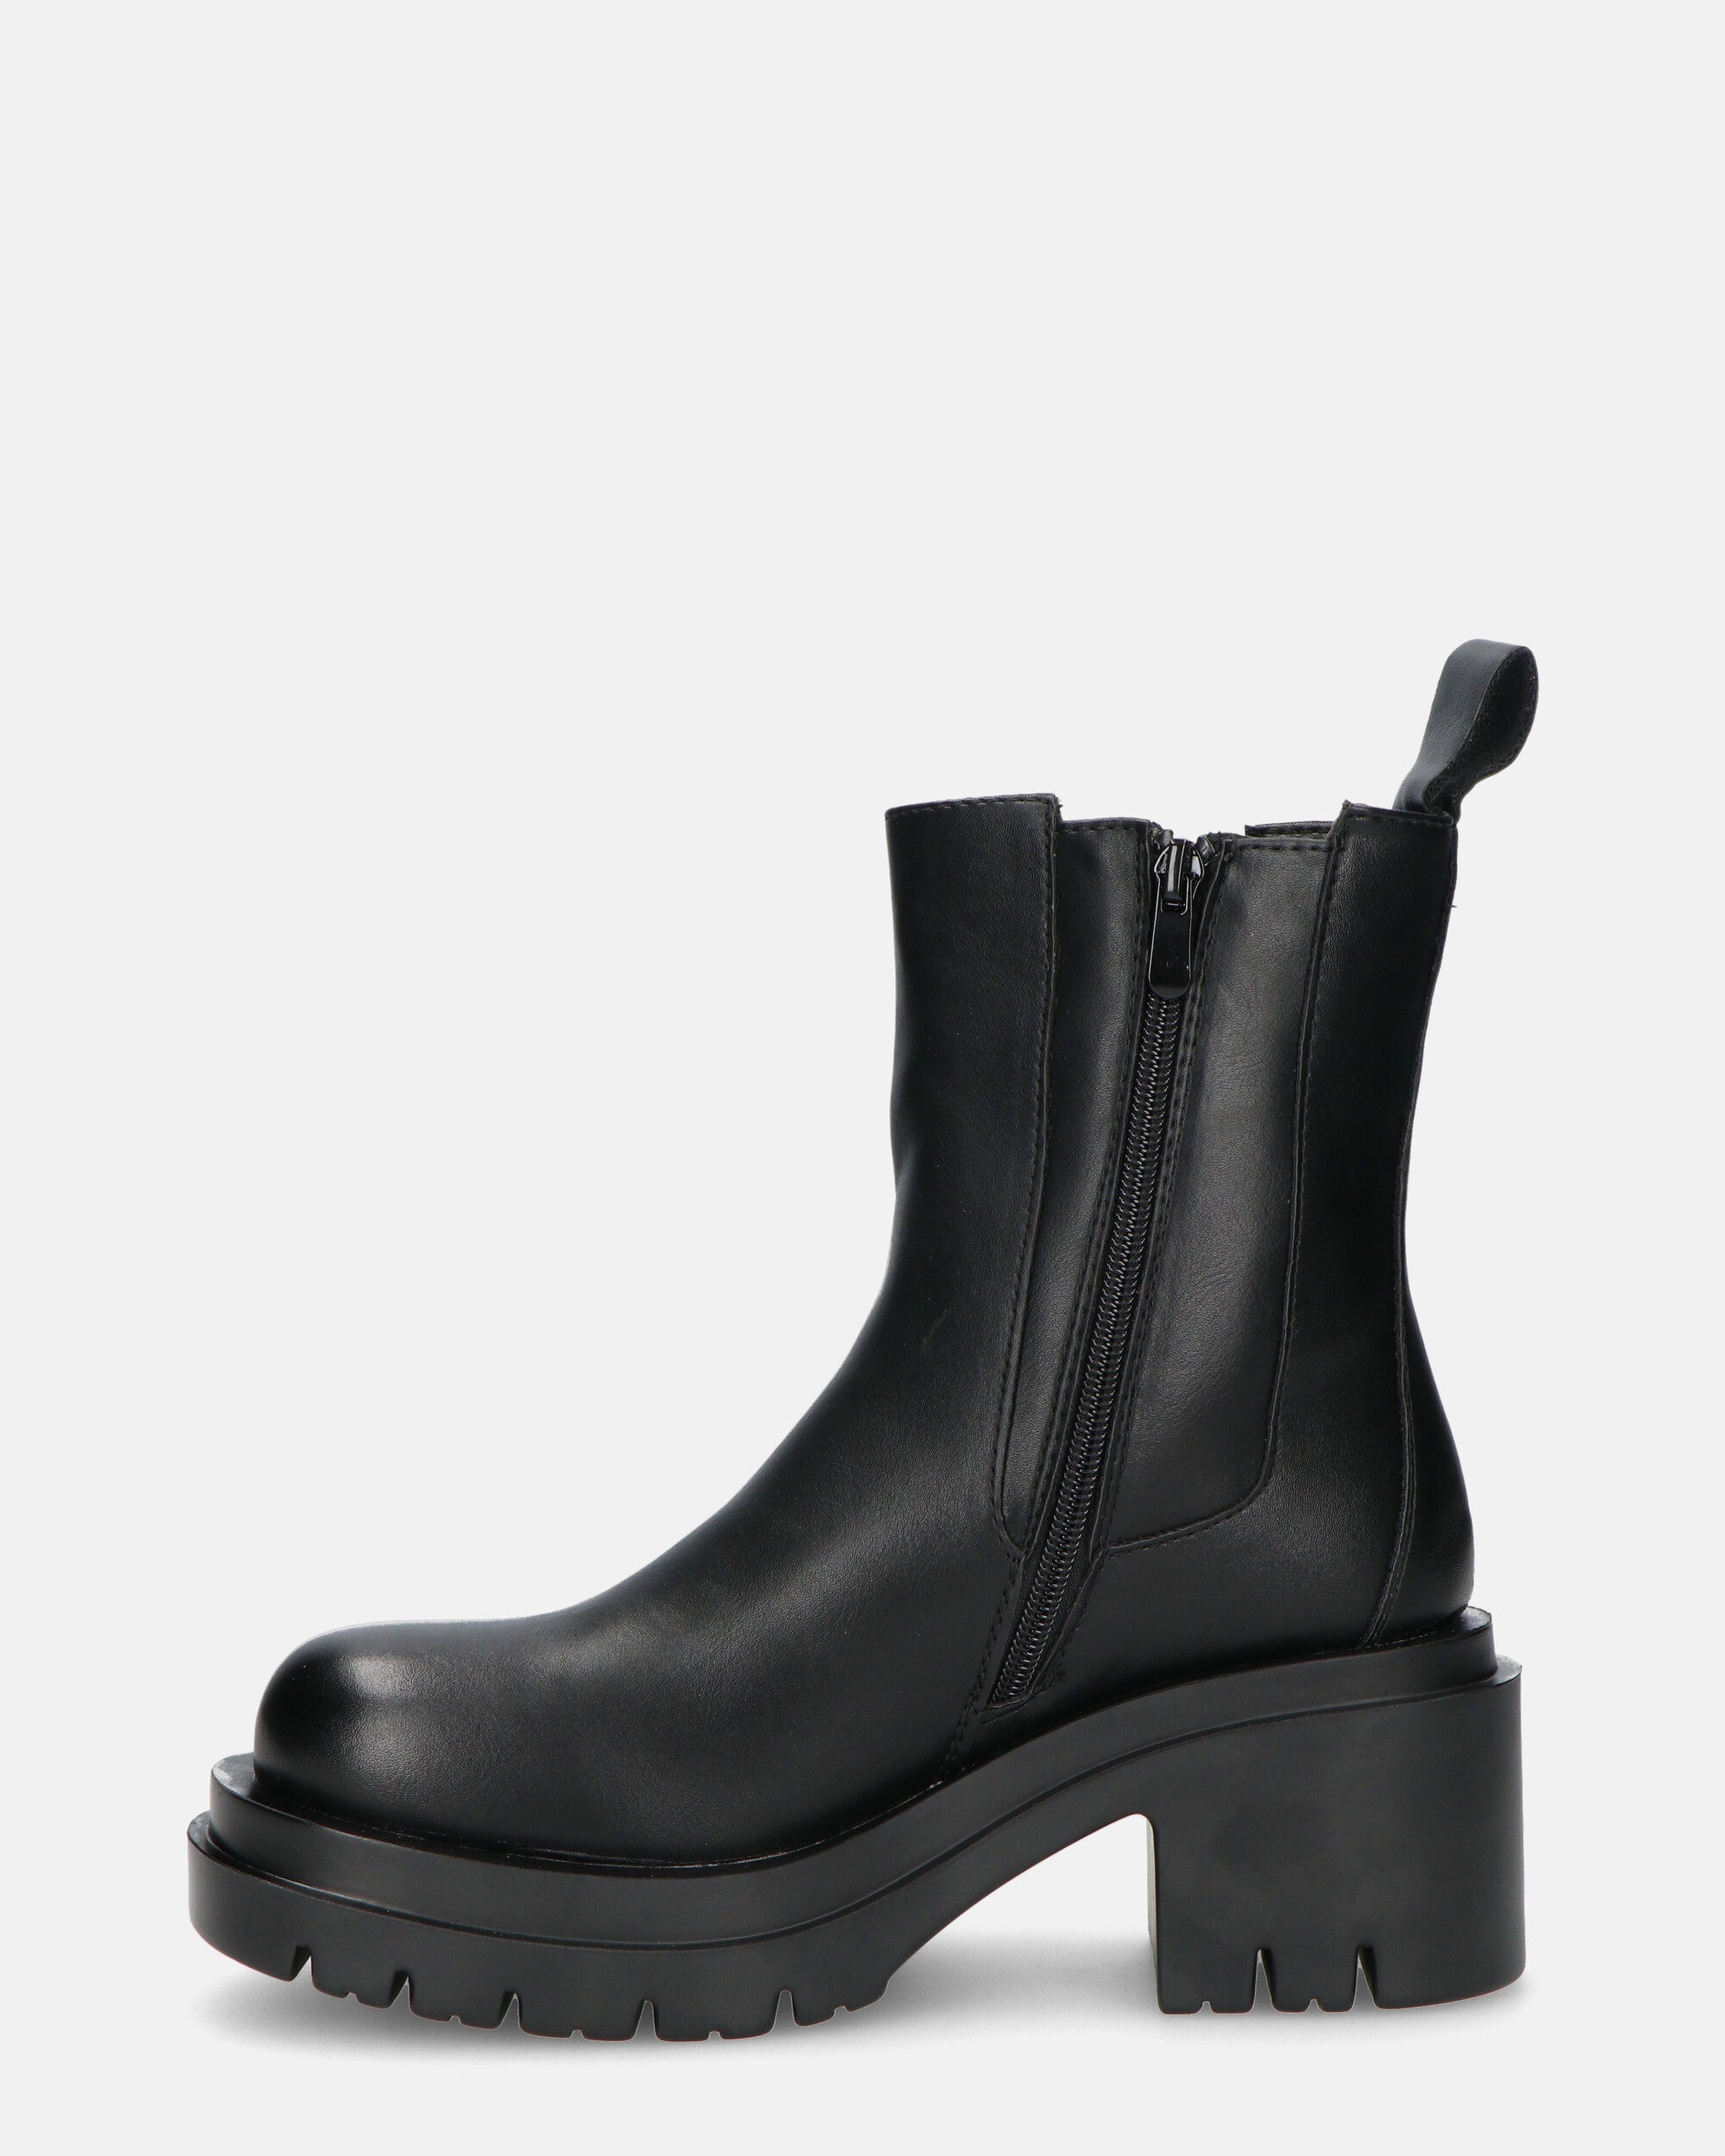 PRISCA - black ankle boots with elastic band and side zip